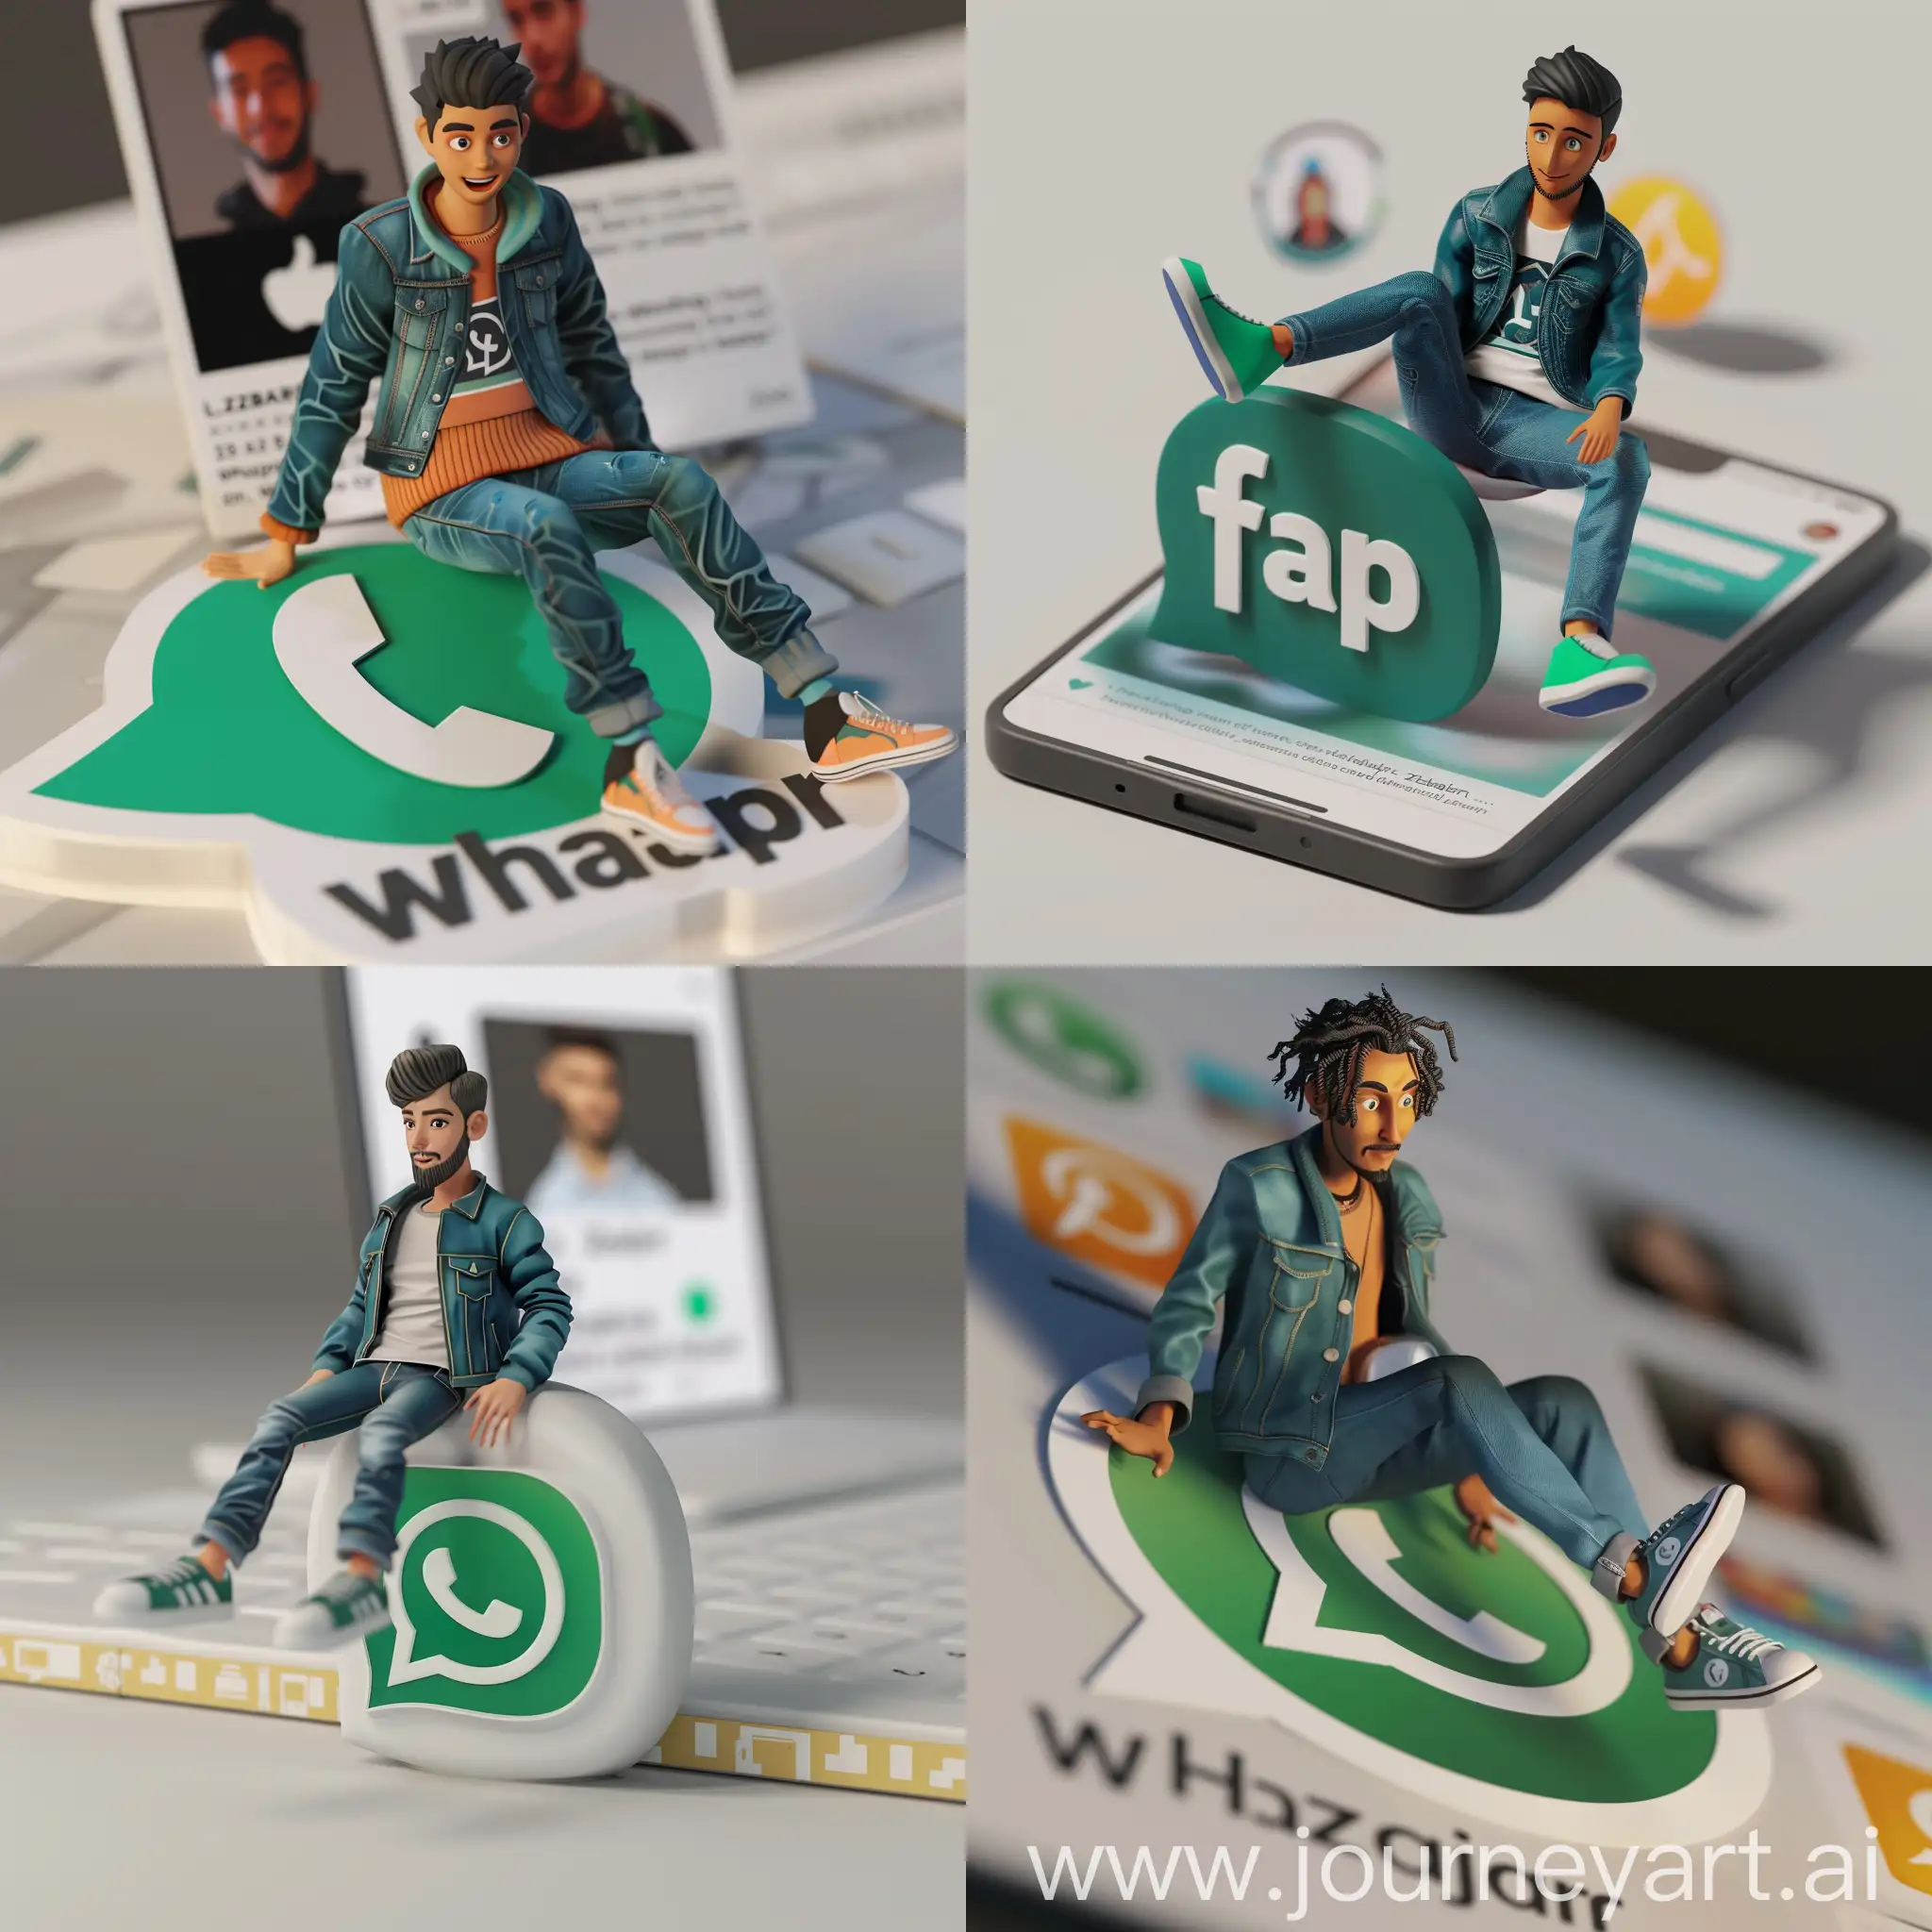 Create a 3D illustration of an animated character sitting casually on top of a social media logo "WhatsApp". The character must wear casual modern clothing such as jeans jacket and sneakers shoes. The background of the image is a social media profile page with a user name "Zubair" and a profile picture that match.